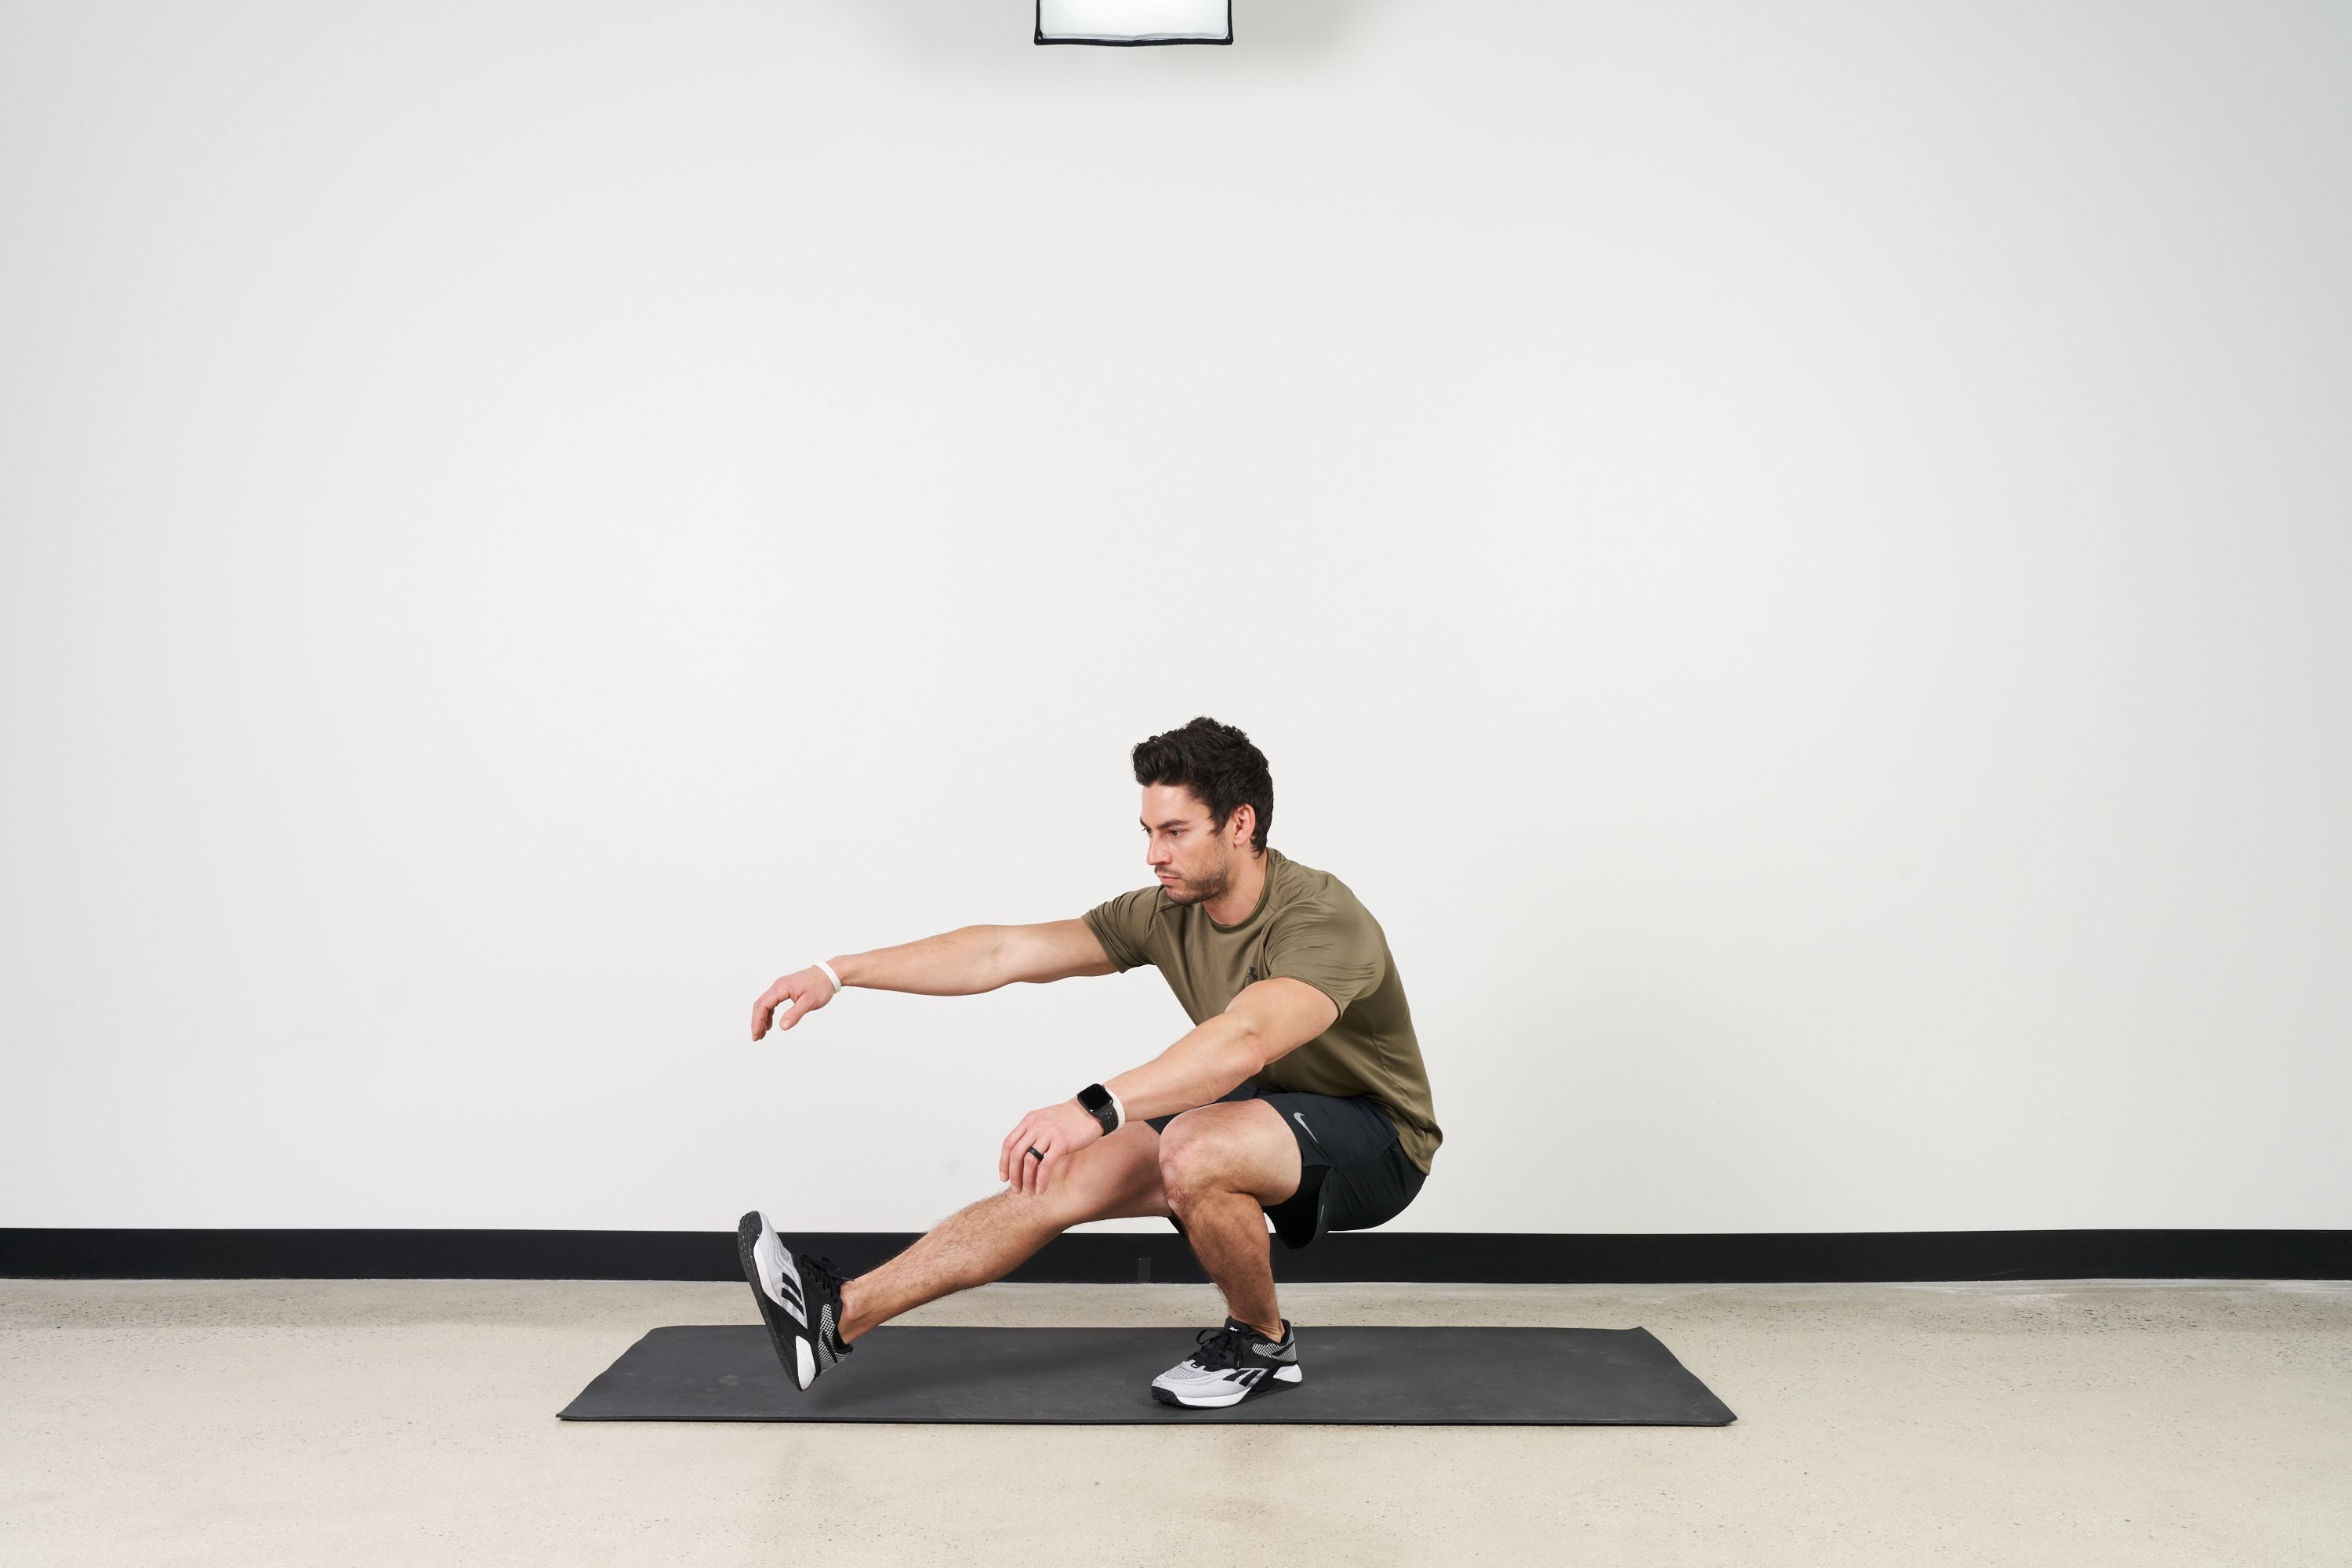 Pistol Squat: How to Do It, Form Corrections, and Variations